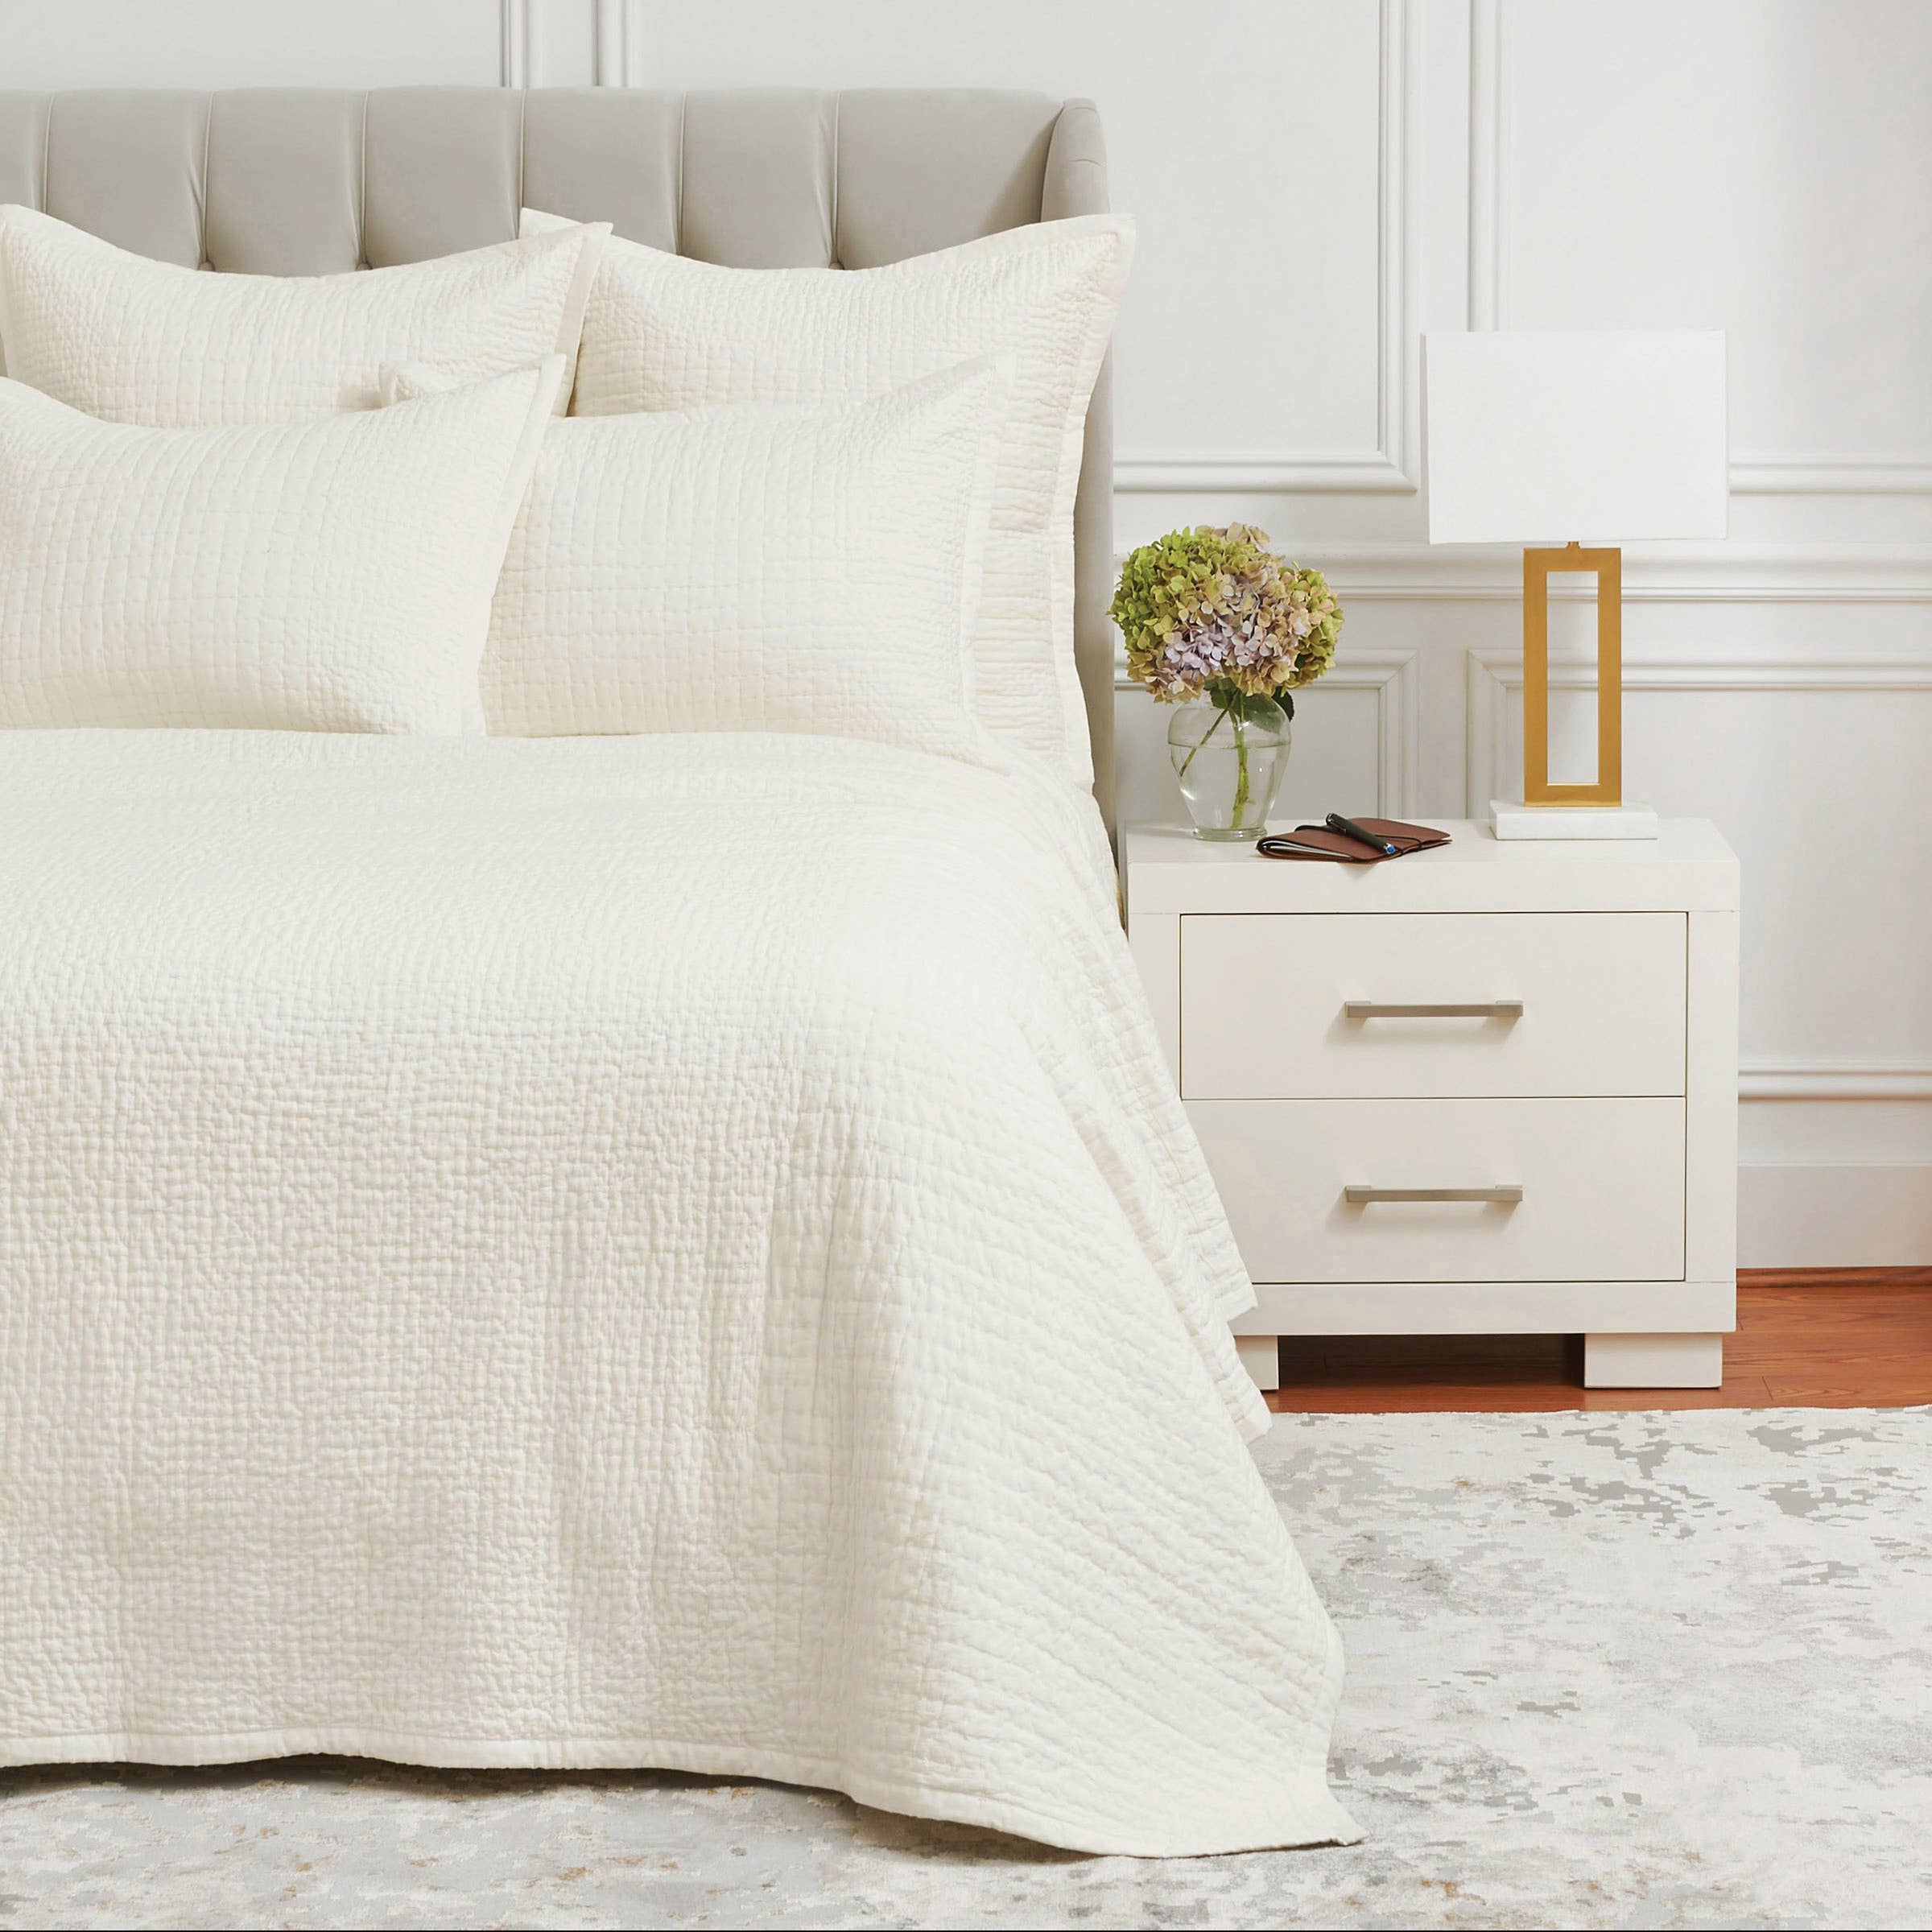 The Willa Ivory sham features two complementary quilting styles, both hand-stitched by skilled artisans for a uniquely luxurious experience. This lightweight 100% cotton voile collection is the perfect neutral backdrop upon which to build a personal retreat. Amethyst Home provides interior design services, furniture, rugs, and lighting in the Malibu metro area.